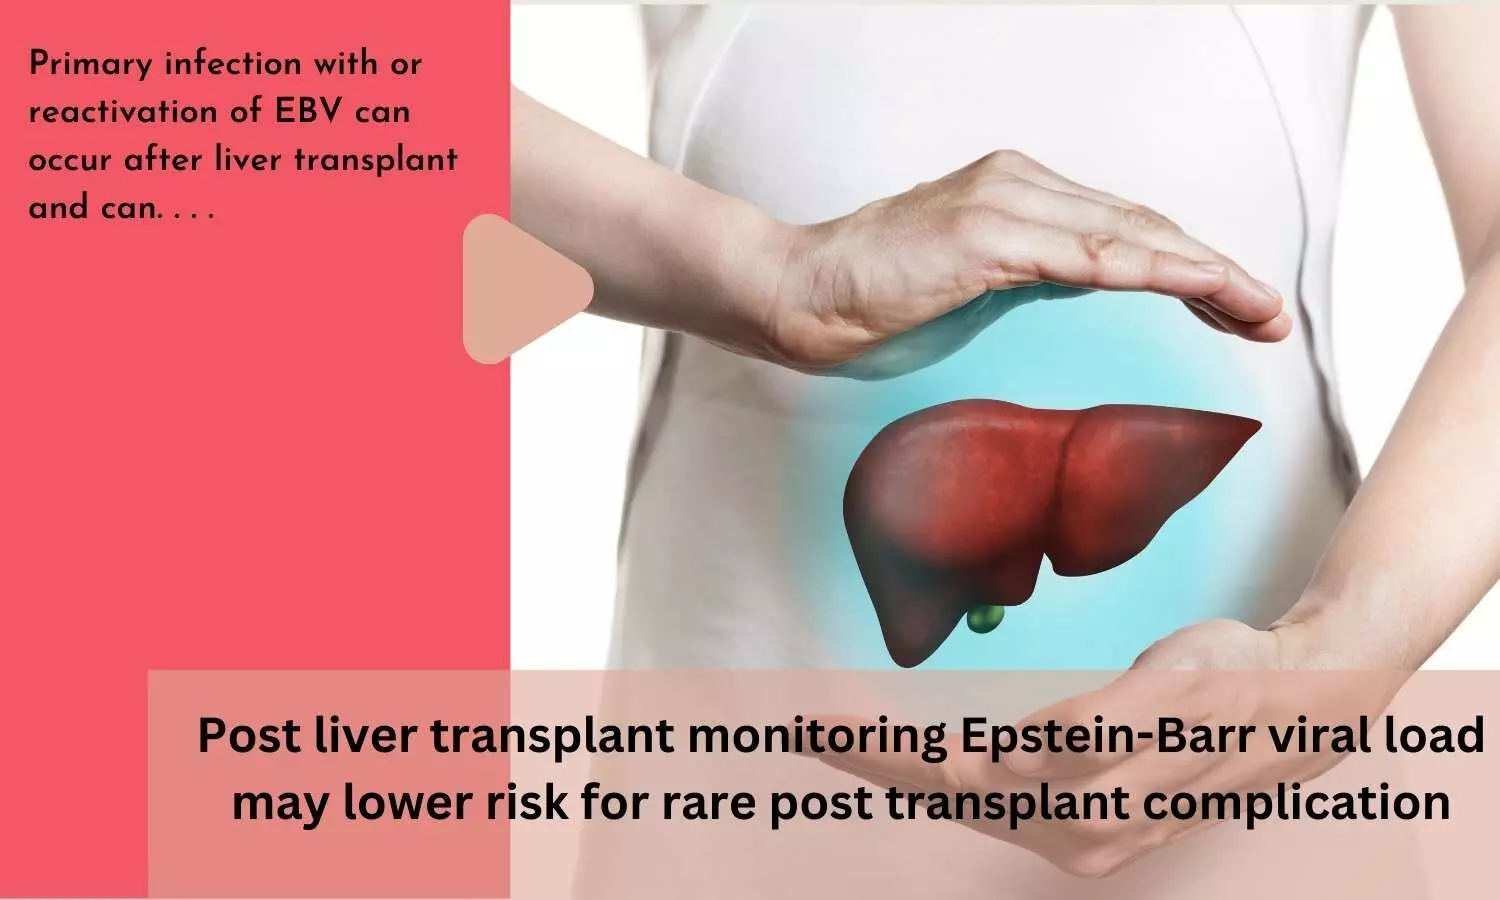 Post liver transplant monitoring Epstein-Barr viral load may lower risk for rare post transplant complication